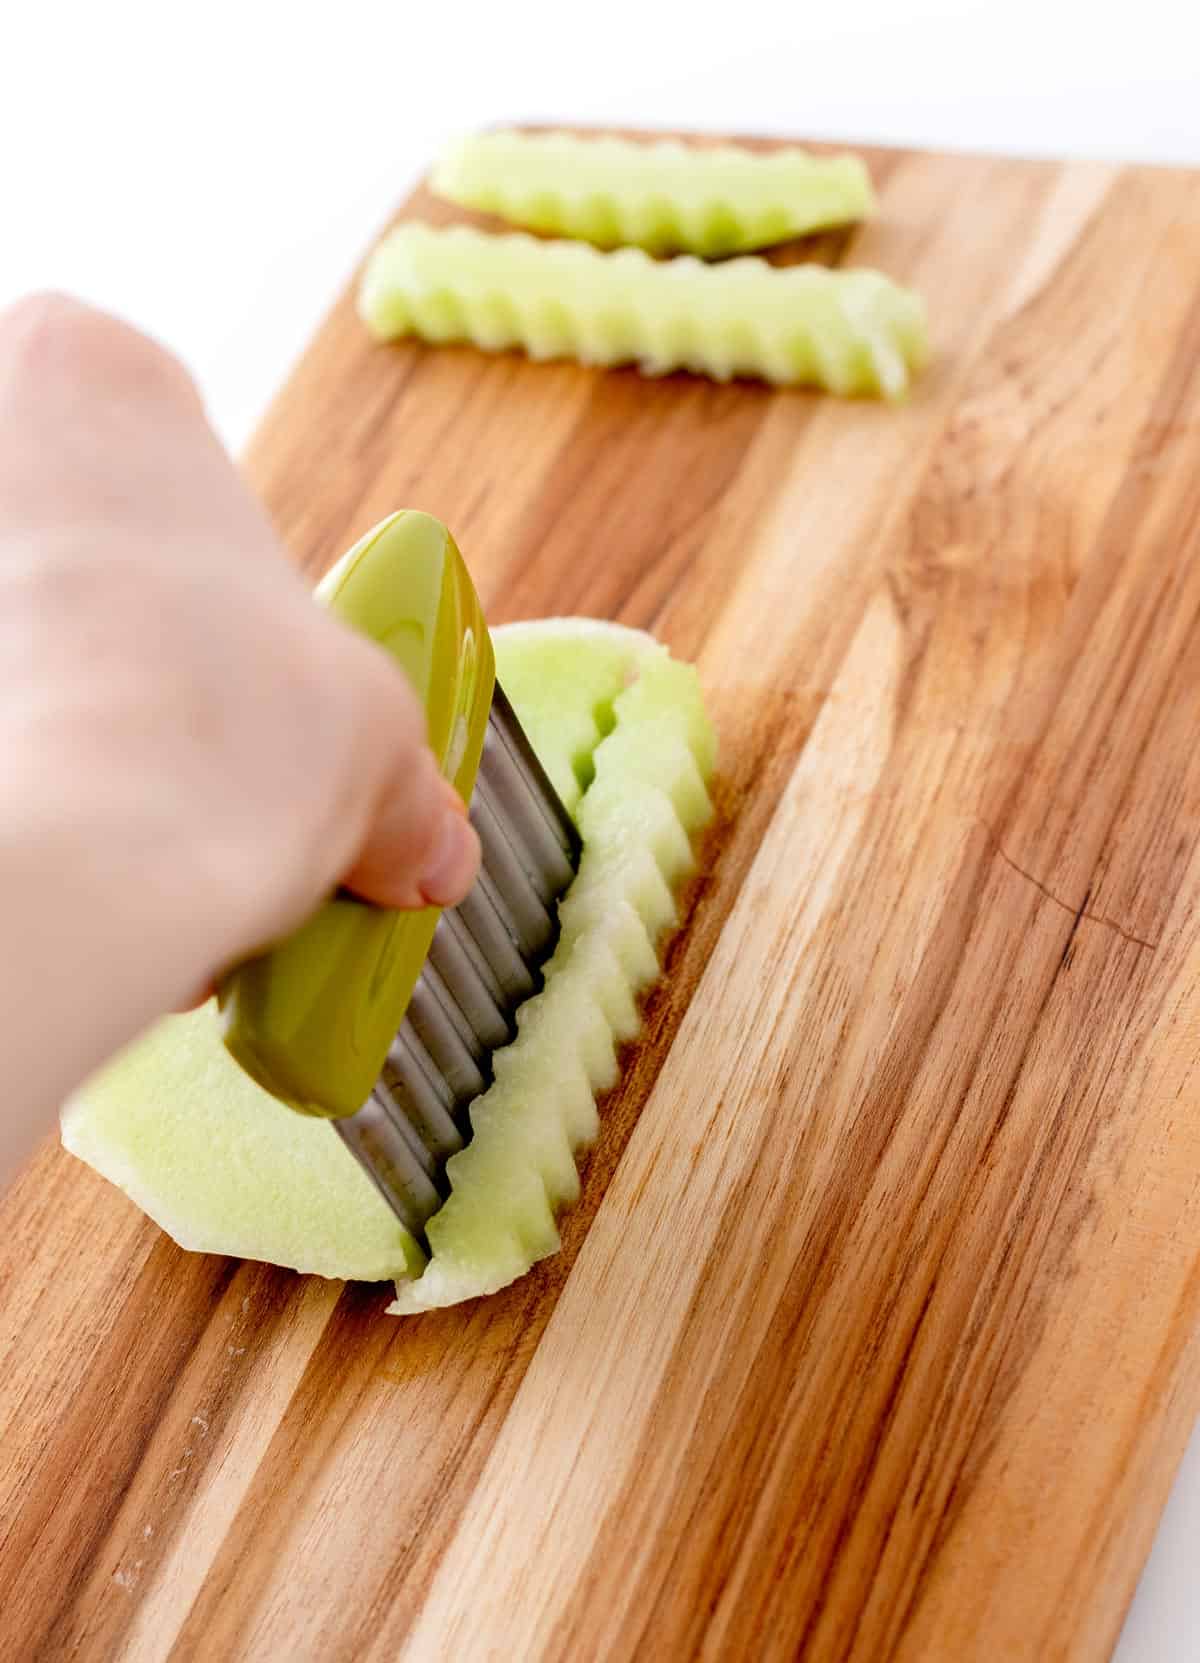 Using a crinkle cutter to make fries out of honeydew melon.